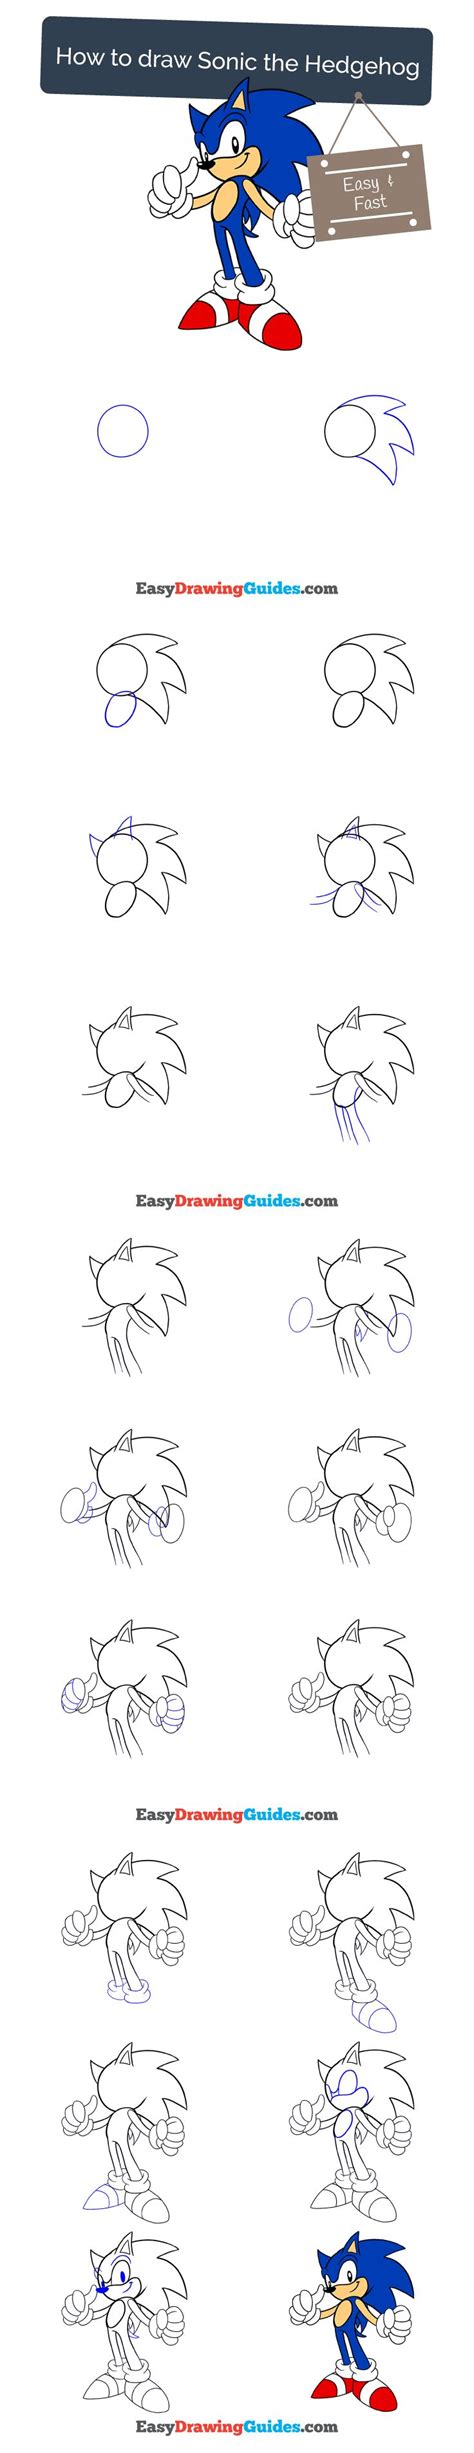 How To Draw Sonic Step By Step Guide At How To